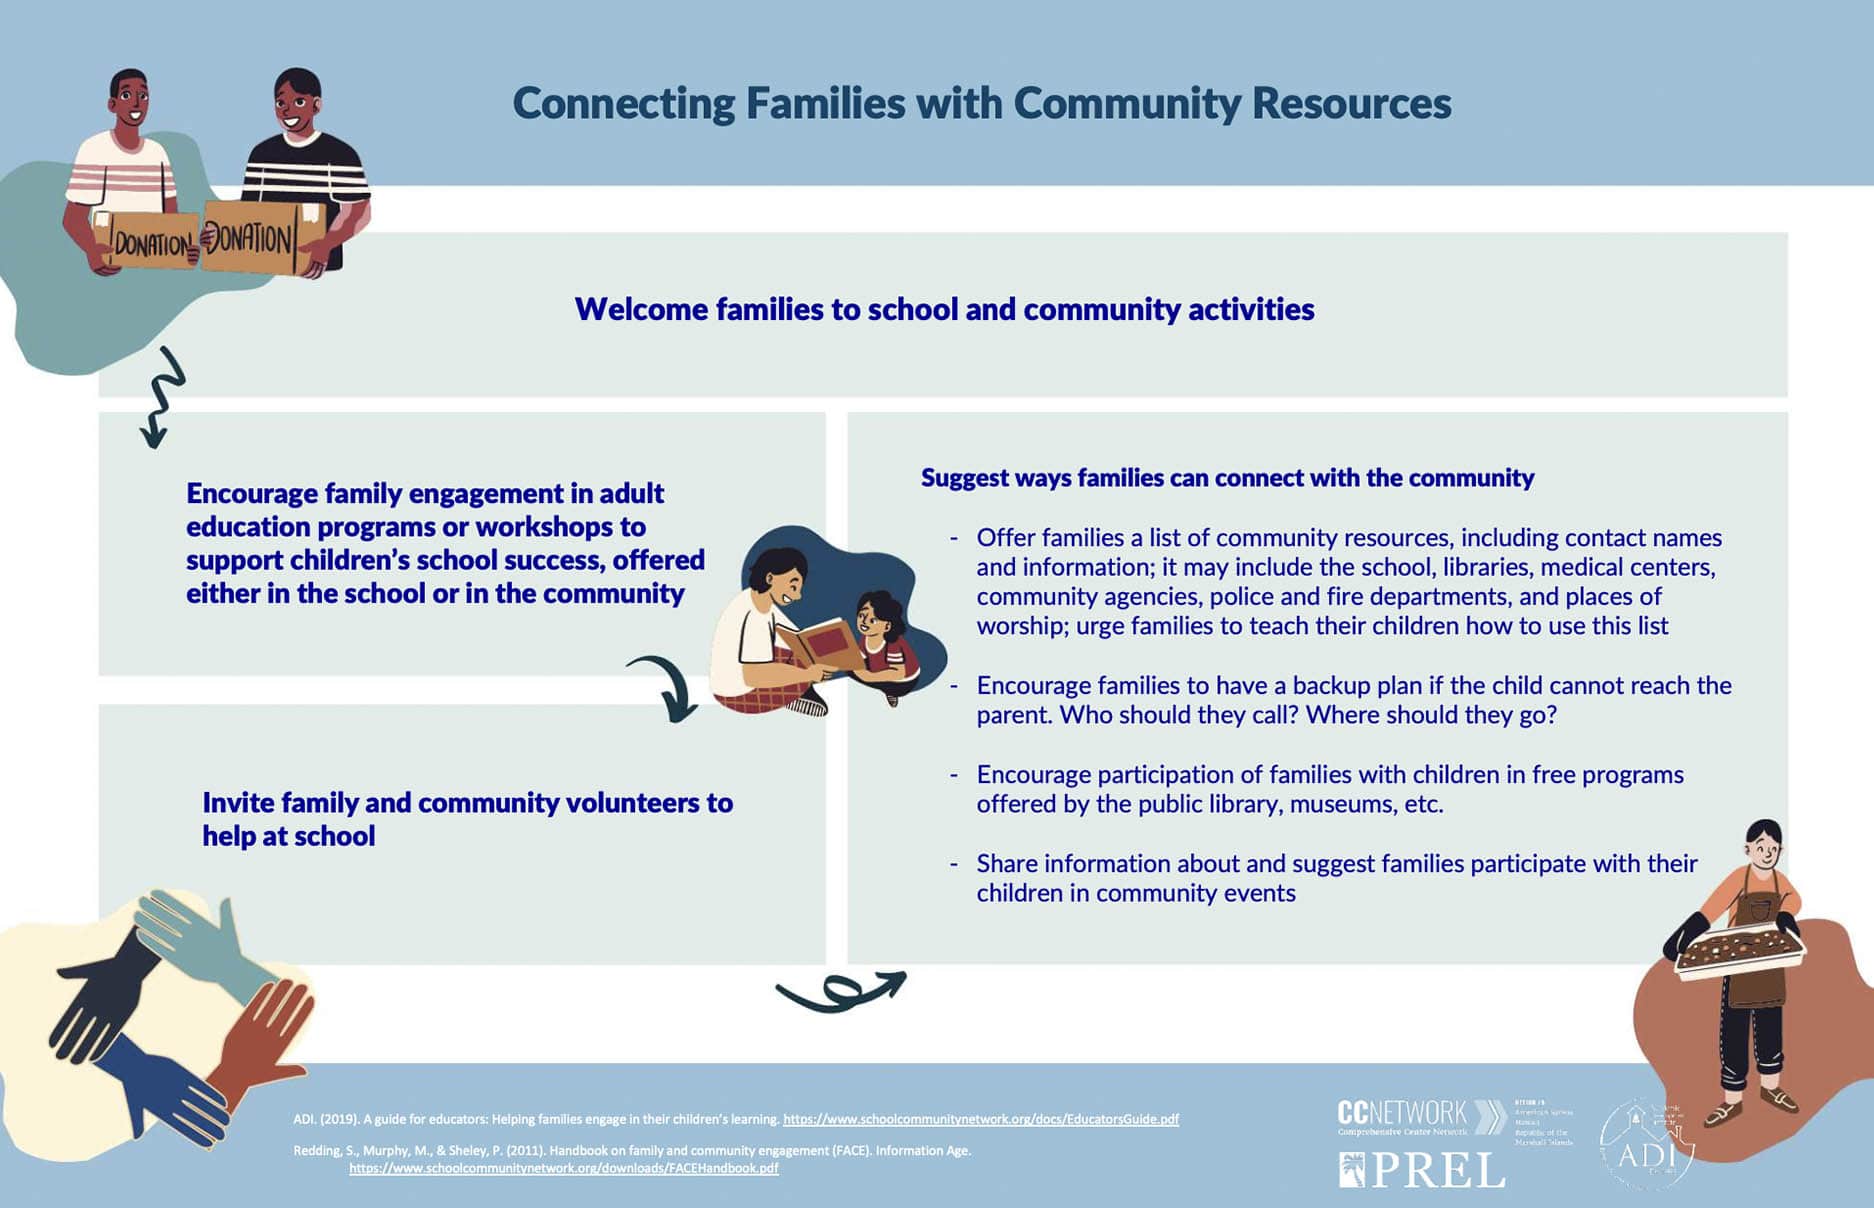 6 Connecting Families with Community Resources